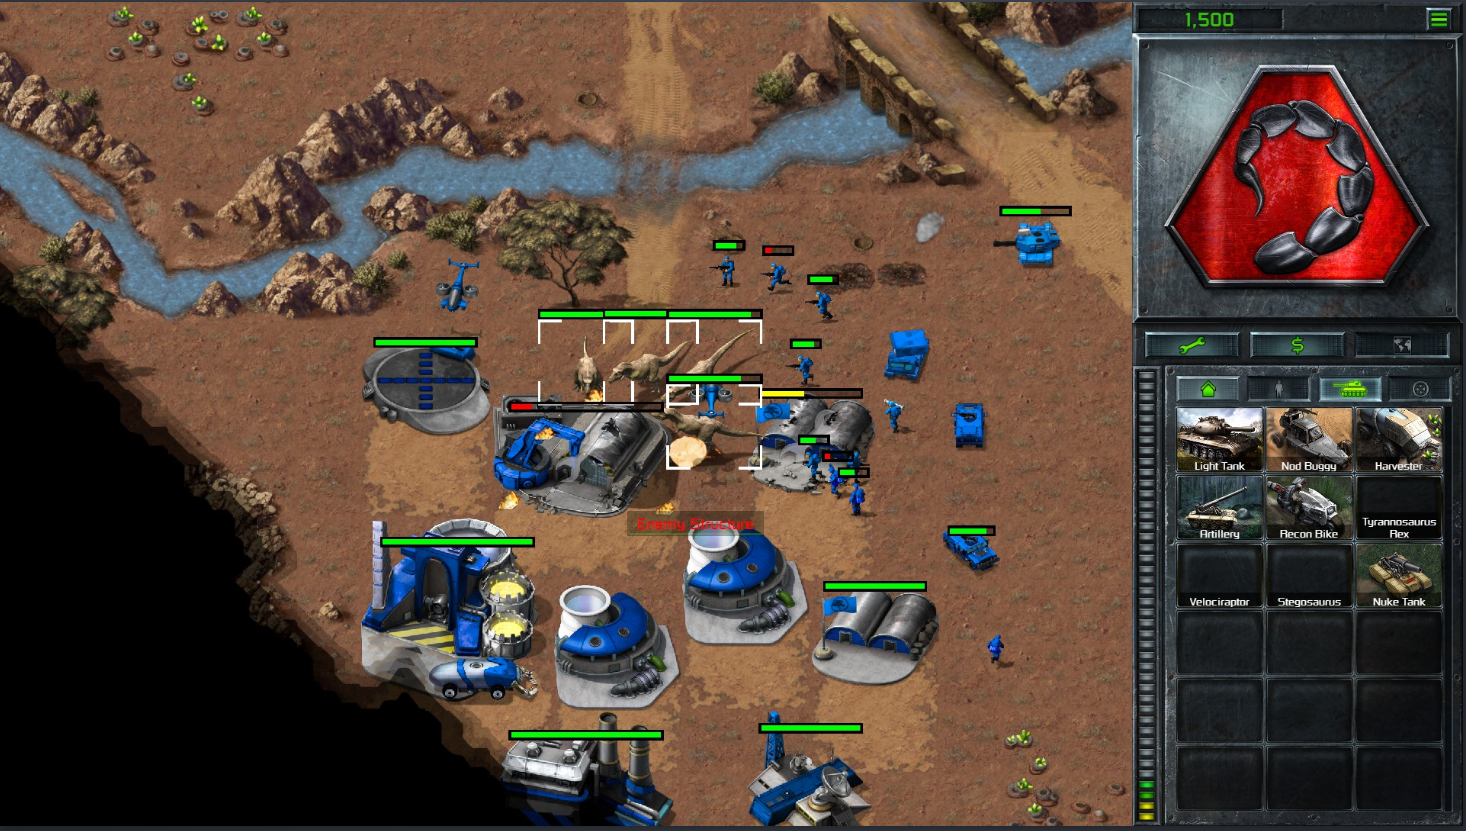 Command conquer версии. Command & Conquer Remastered collection. Command Conquer Remastered collection 2020. Command & Conquer Remastered collection юниты. C&C Red Alert Remastered 2020.